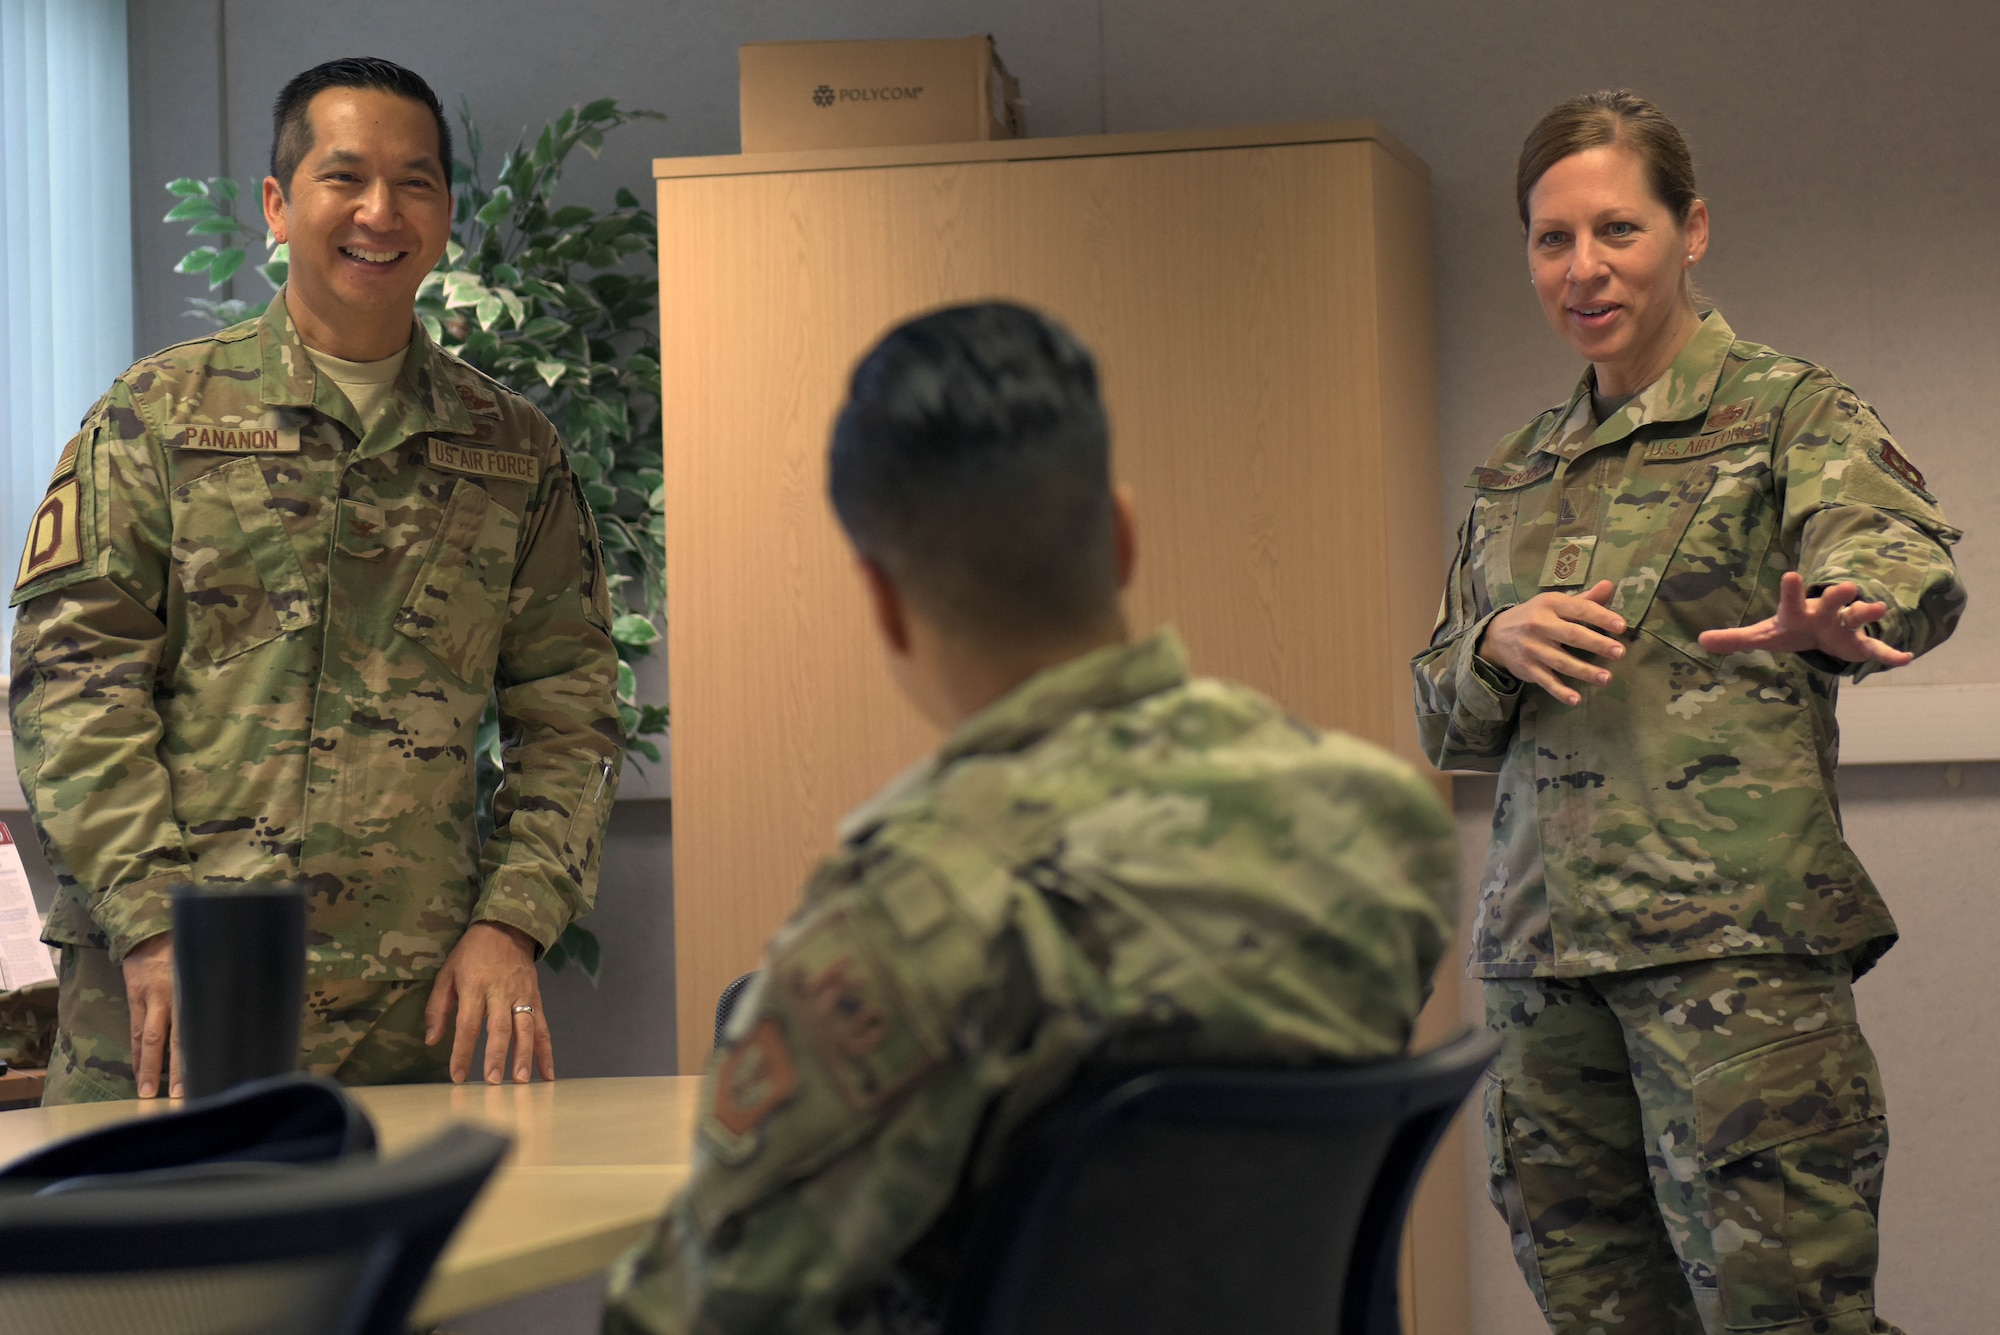 U.S. Air Force Col. Troy Pananon, 100th Air Refueling Wing commander, and Chief Master Sgt. Kathi Glascock, 100th ARW command chief, speak with Staff Sgt. Kristina Santos, 100th Security Forces military working dog trainer, during a reintegration briefing at RAF Mildenhall, England, July 9, 2019. Reintegration briefings occur when Airmen return from deployments to help them re-adjust to post deployment life. (U.S. Air Force photo by Senior Airman Benjamin Cooper)